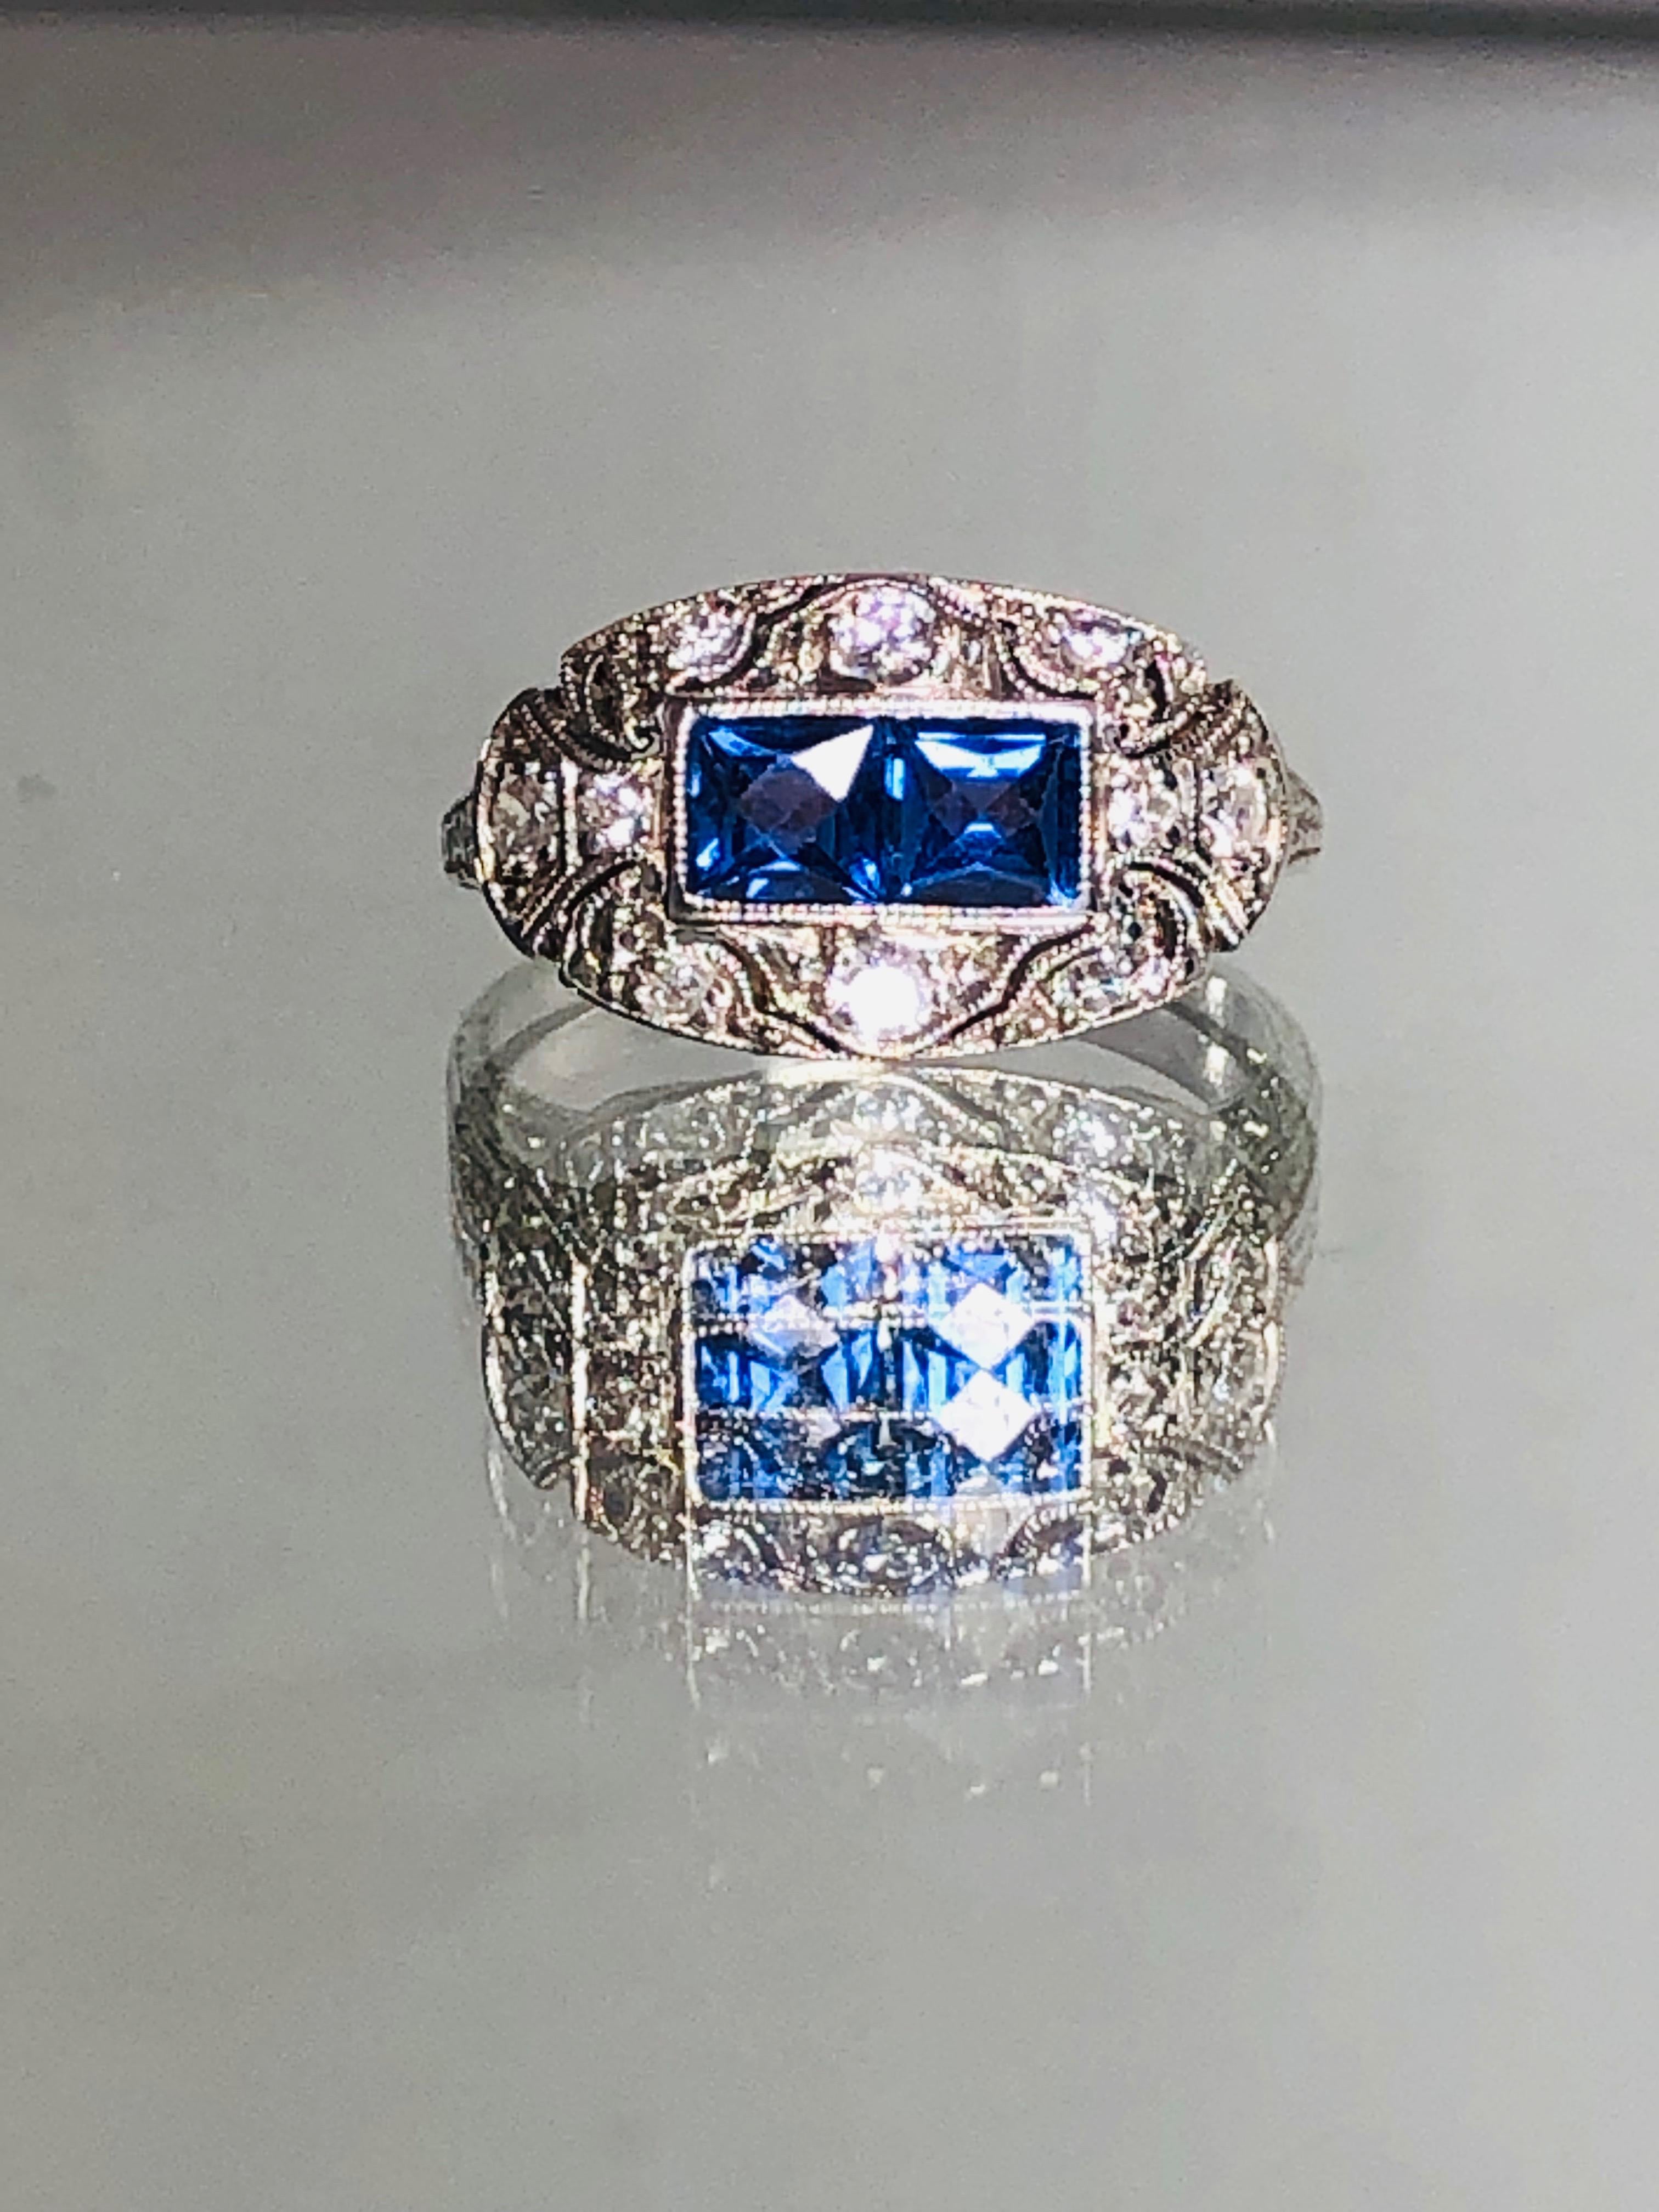 Platinum Diamond & Sapphire Ring

Art Deco ring from around 1890 Privately commissioned.

Intricate Platinum setting with two square very bright blue

Sapphires centre set each measuring approx 4mm around

1ct in total. They are rub over set with